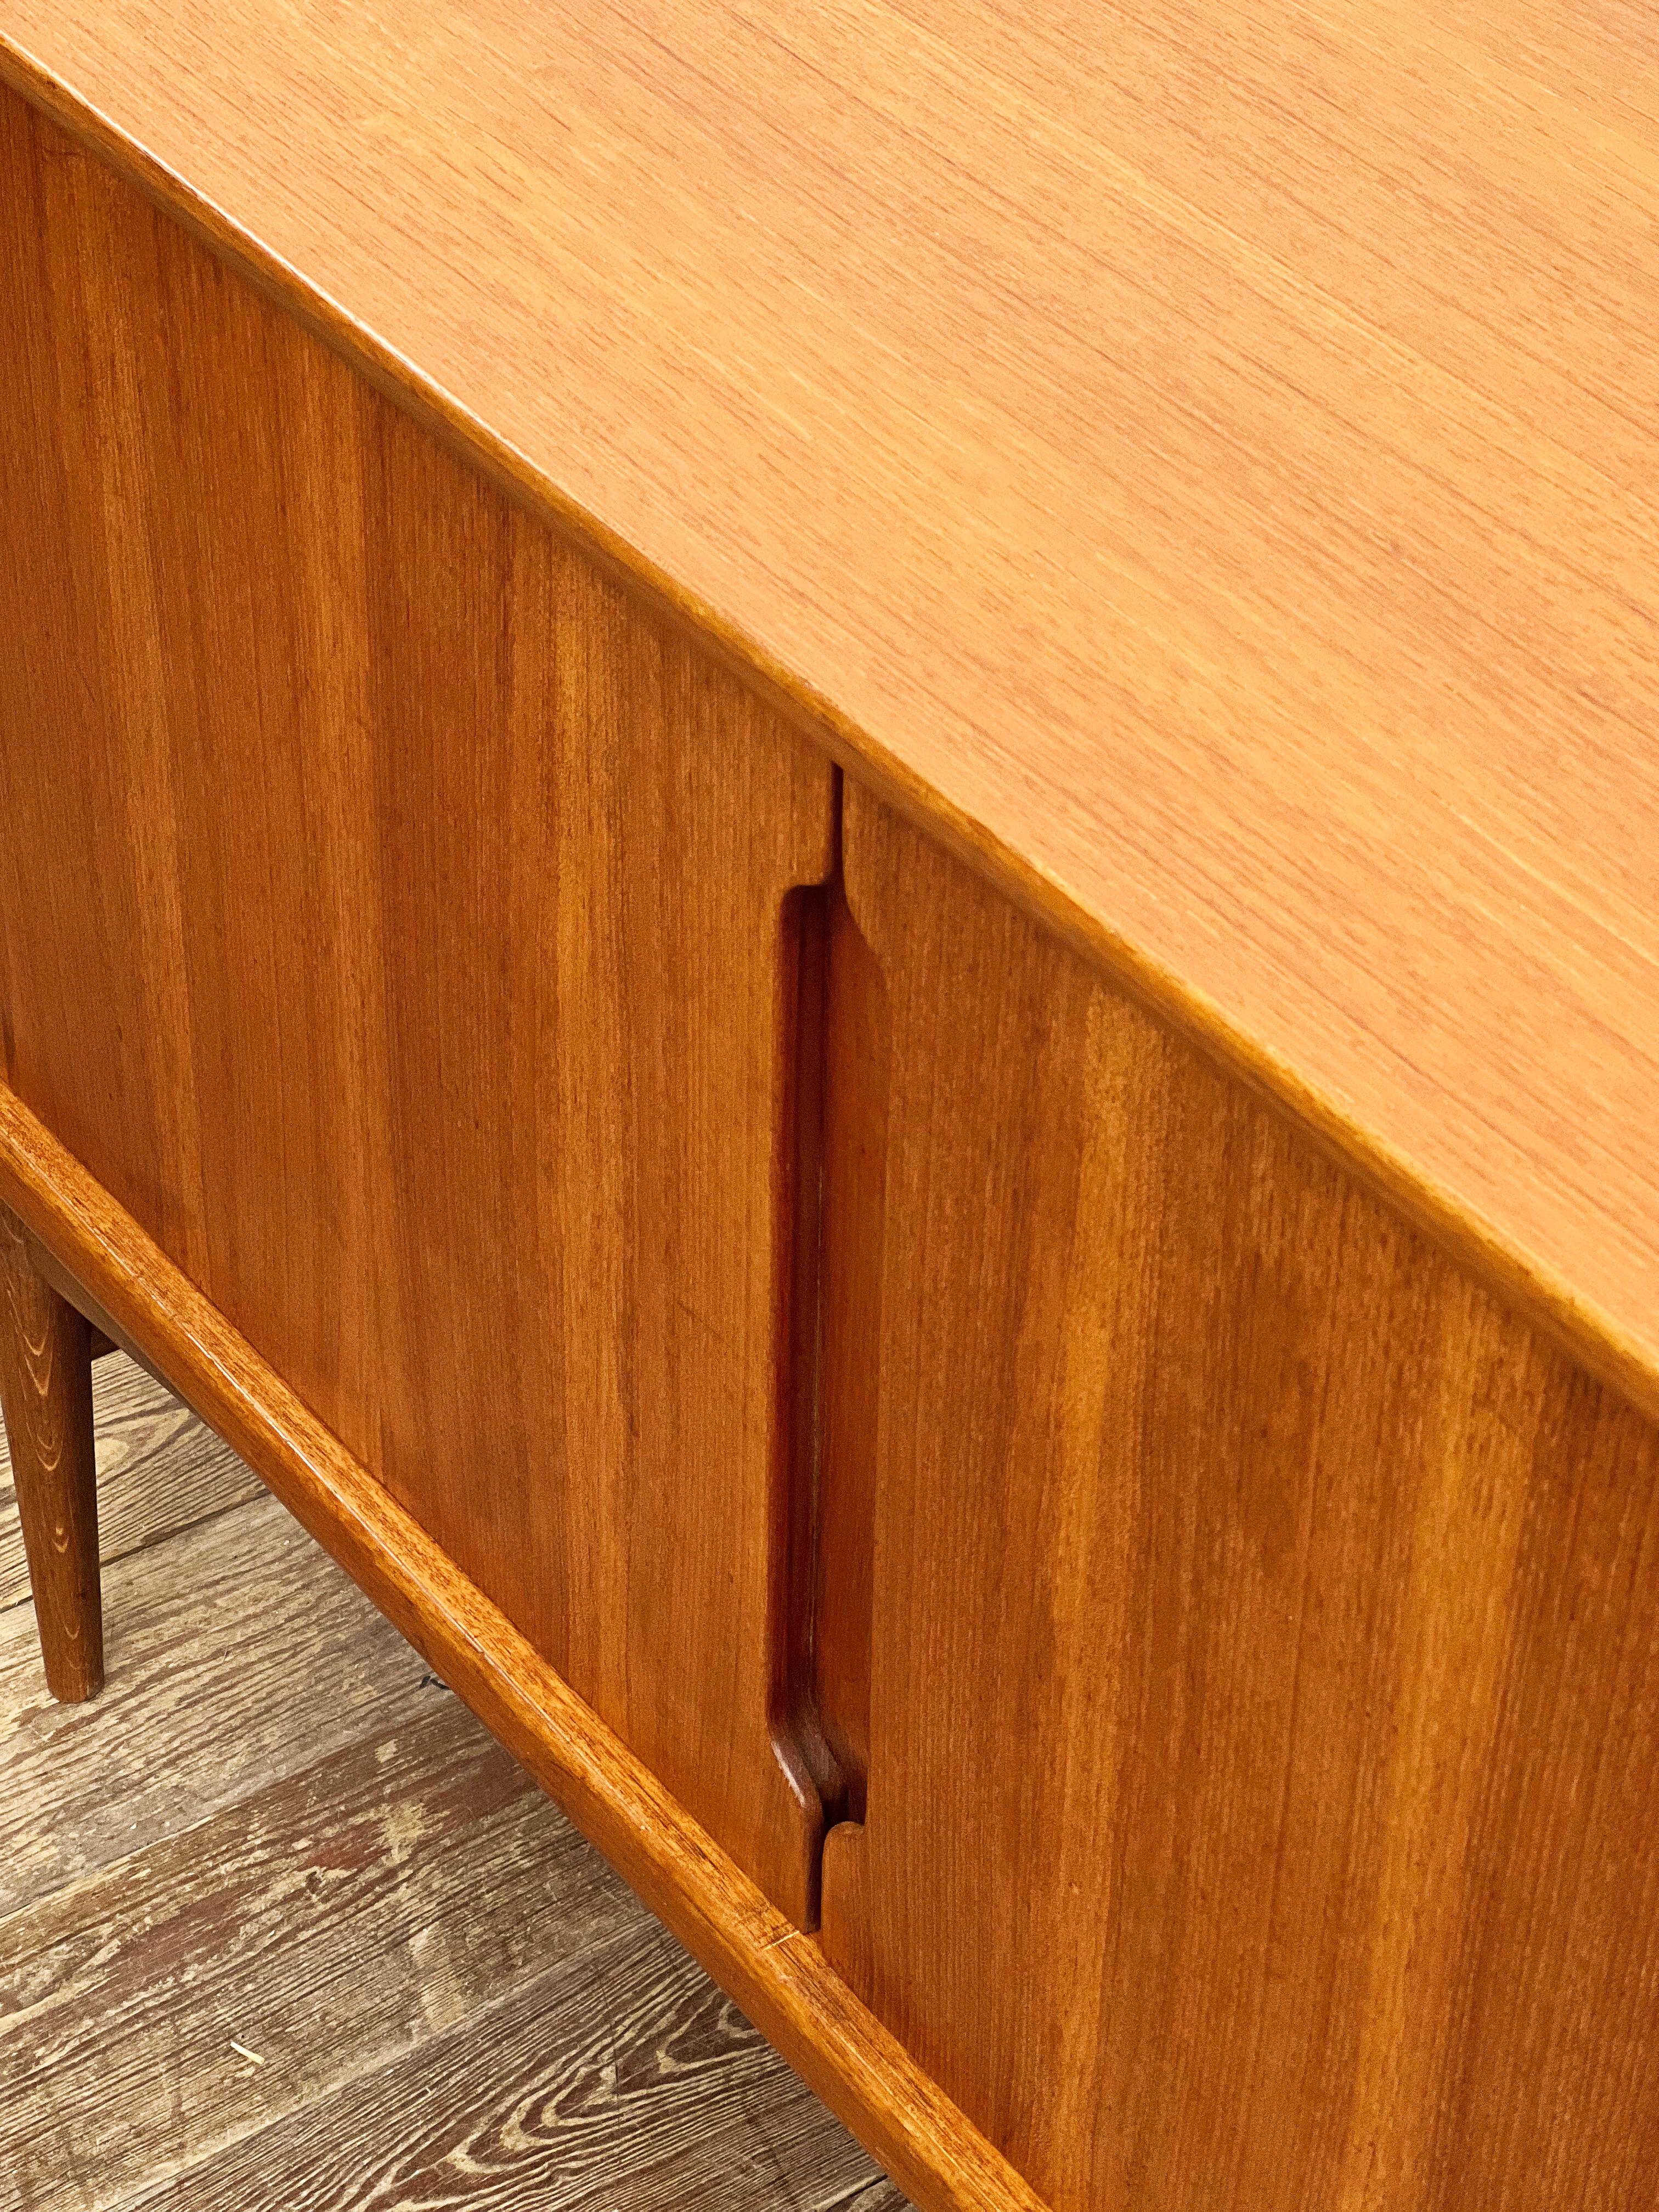 Small Mid-Century Modern Fredericia Sideboard in Teak, Germany, 1950s For Sale 4